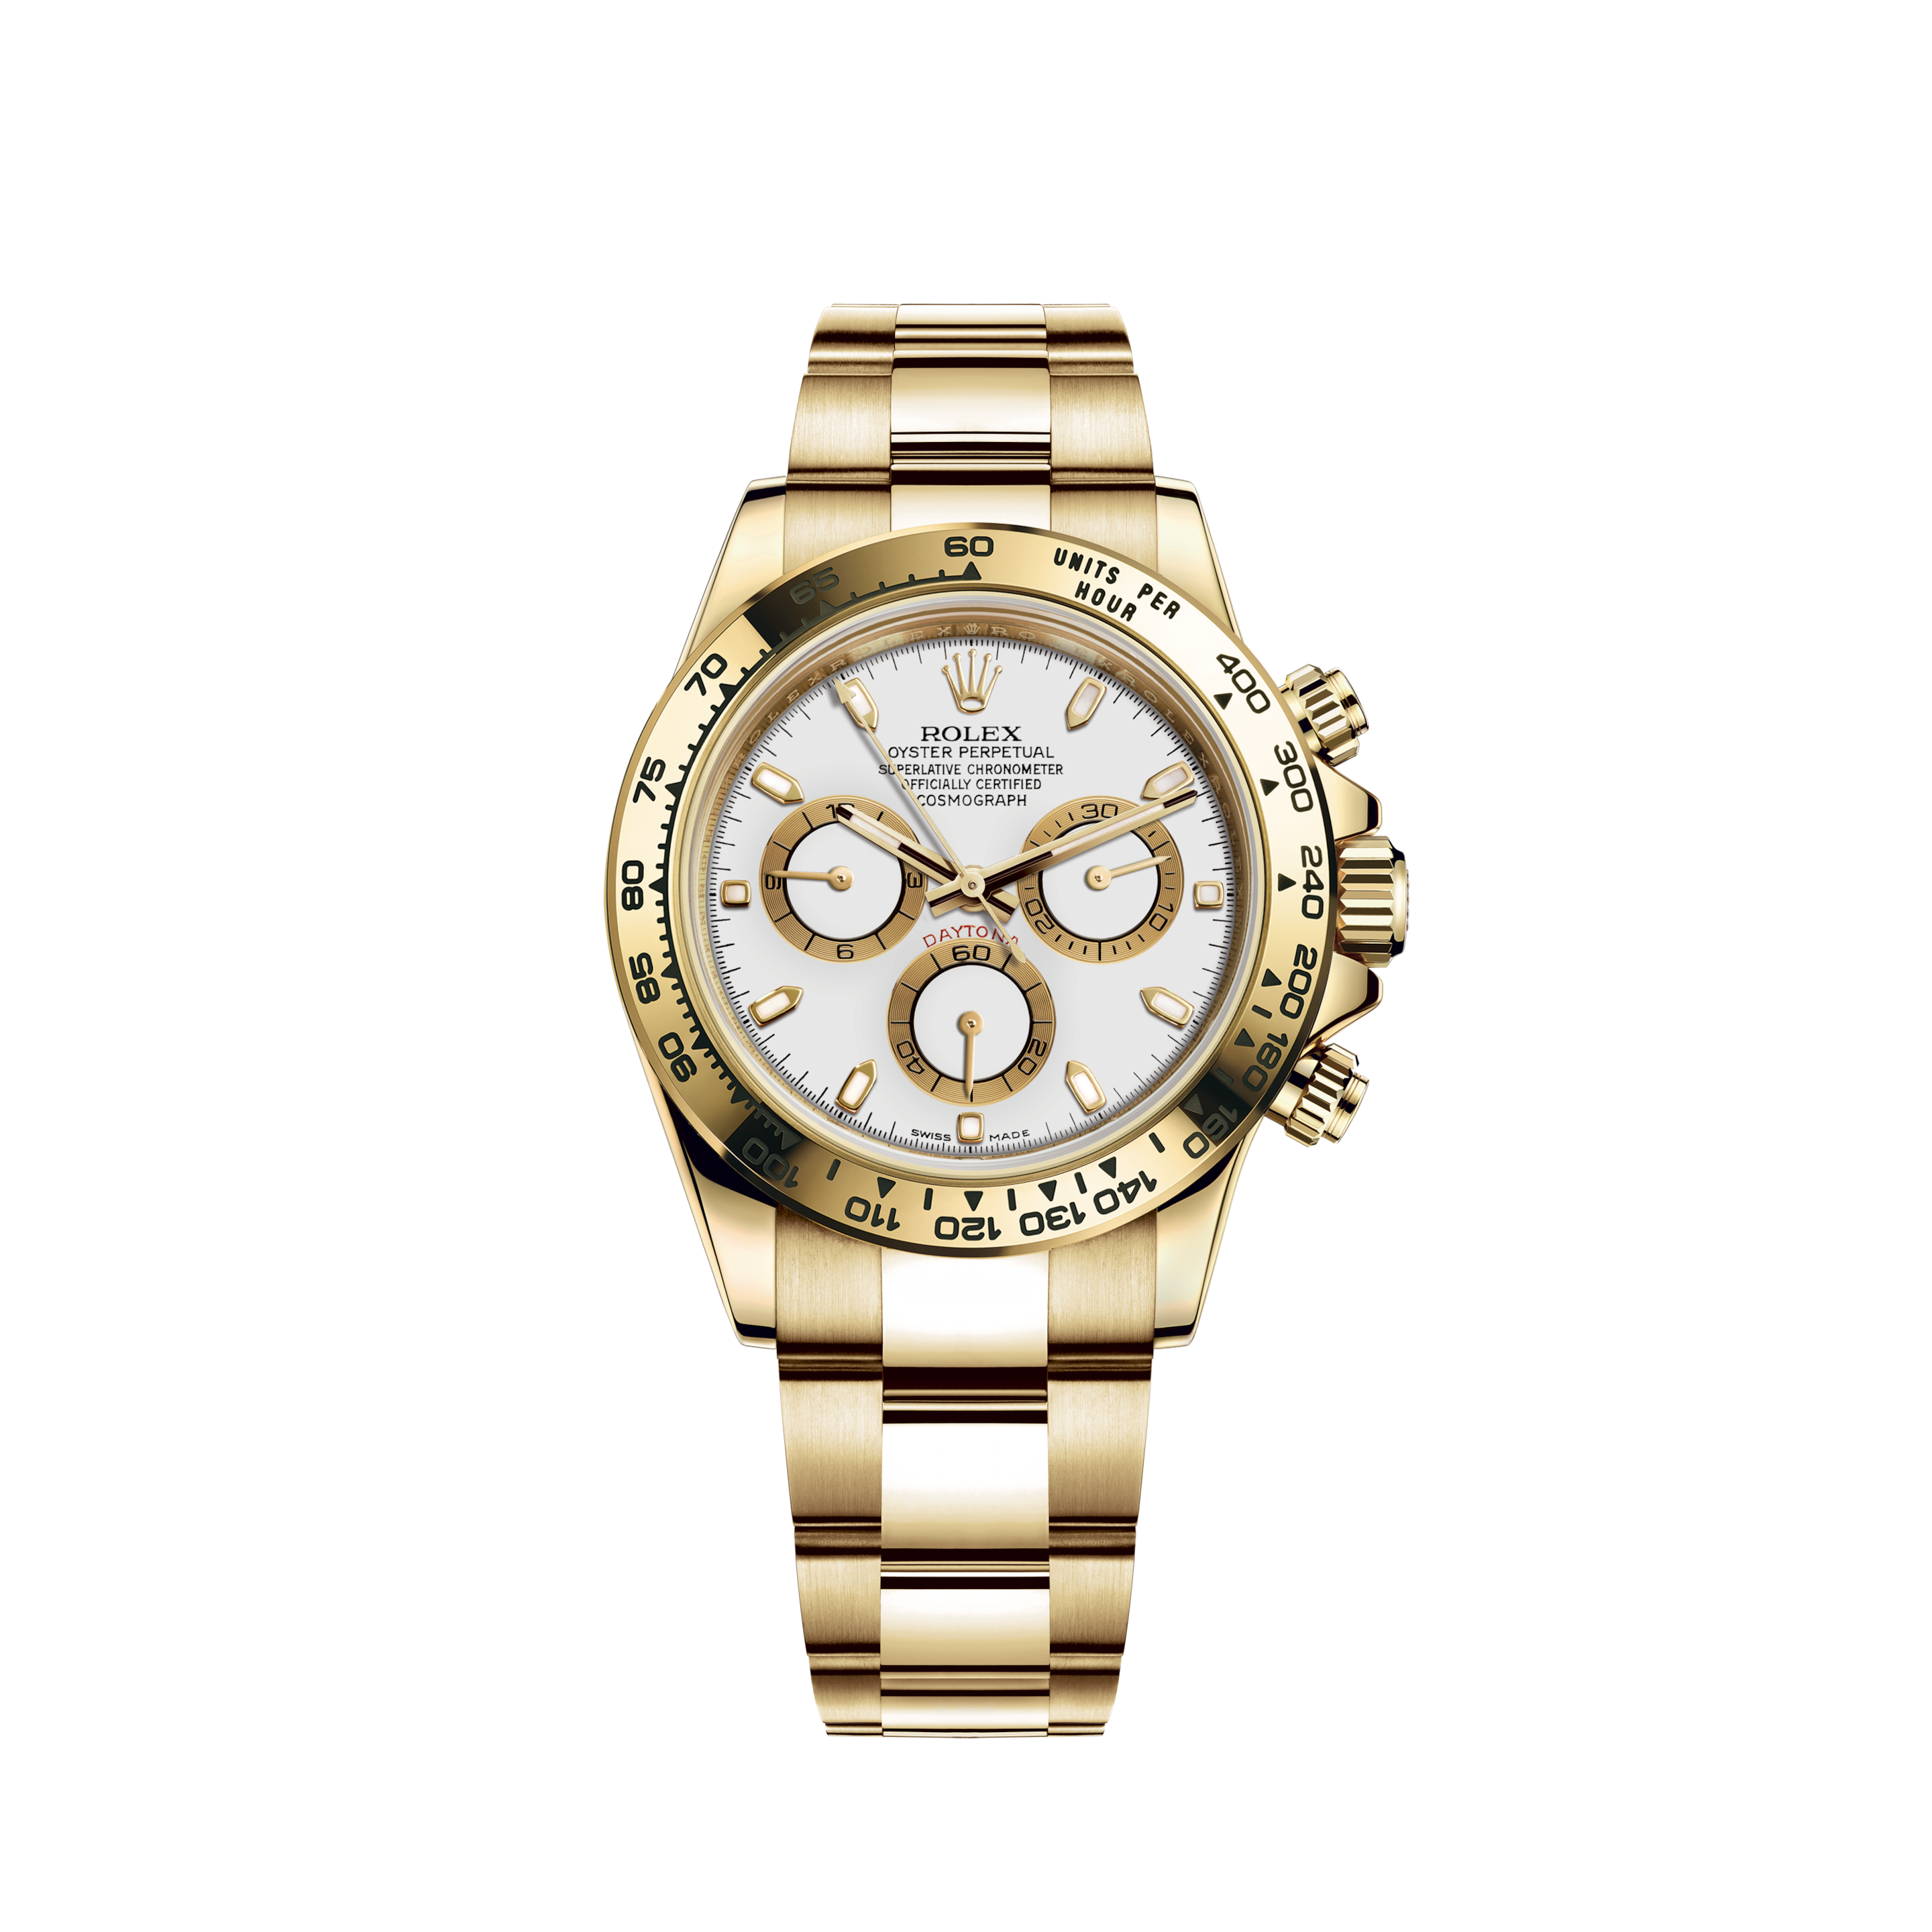 rolex oyster perpetual cosmograph daytona watch